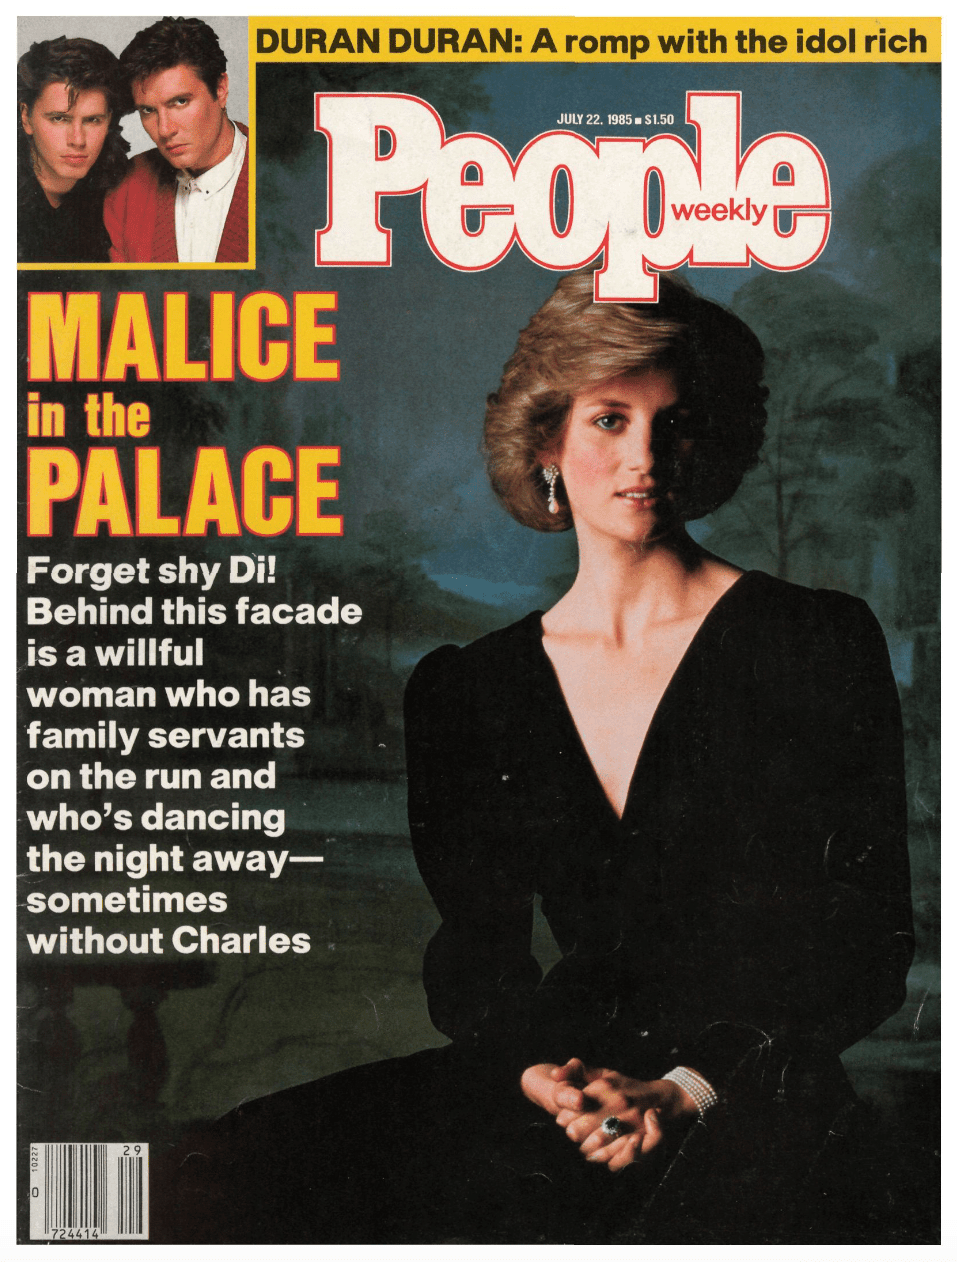 July 22, 1985: Malice in the Palace